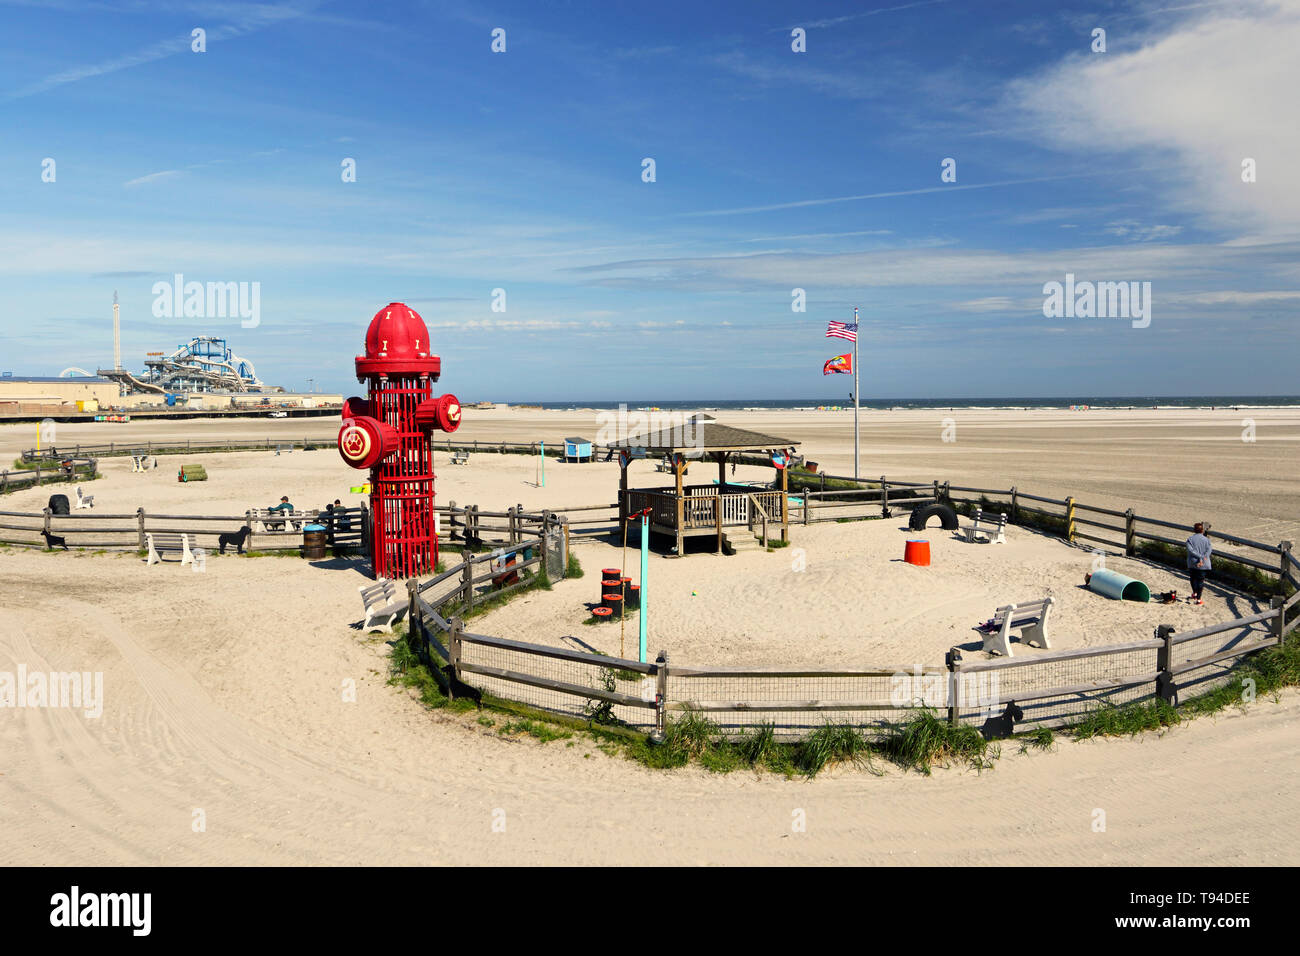 A Dog Park on the beach in Wildwood, New Jersey, USA Stock Photo